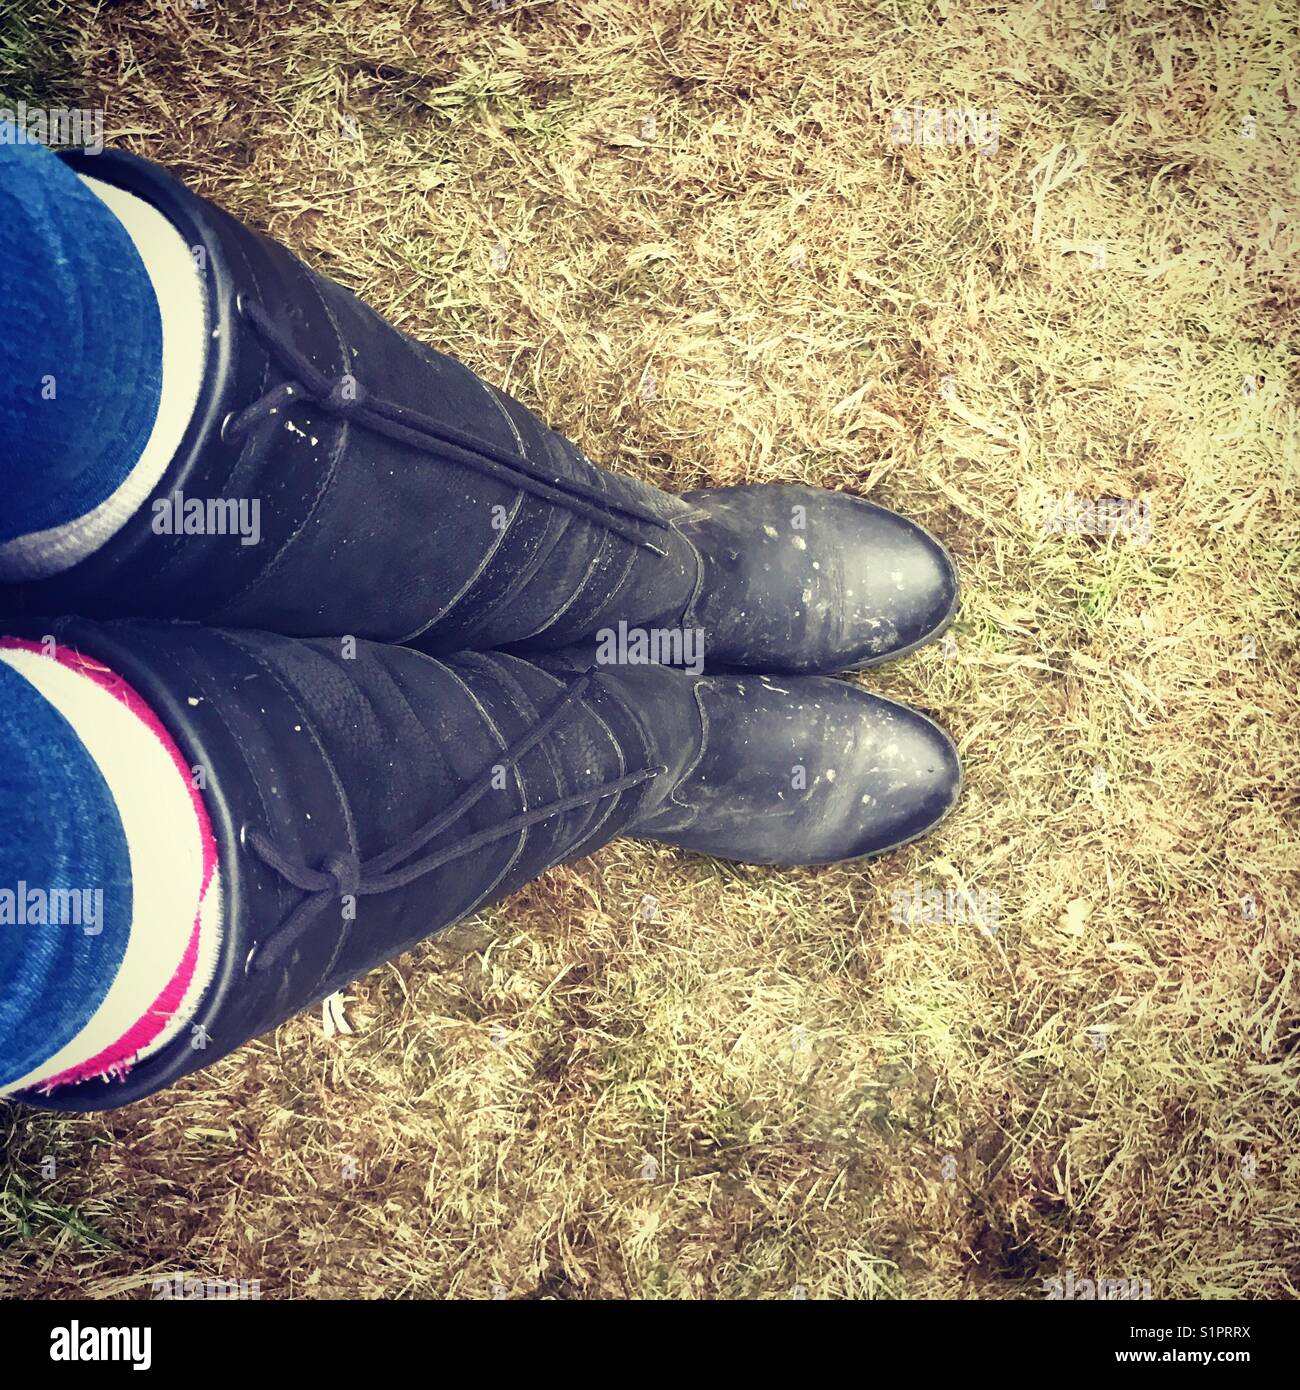 Rm williams riding boots hi-res stock photography and images - Alamy